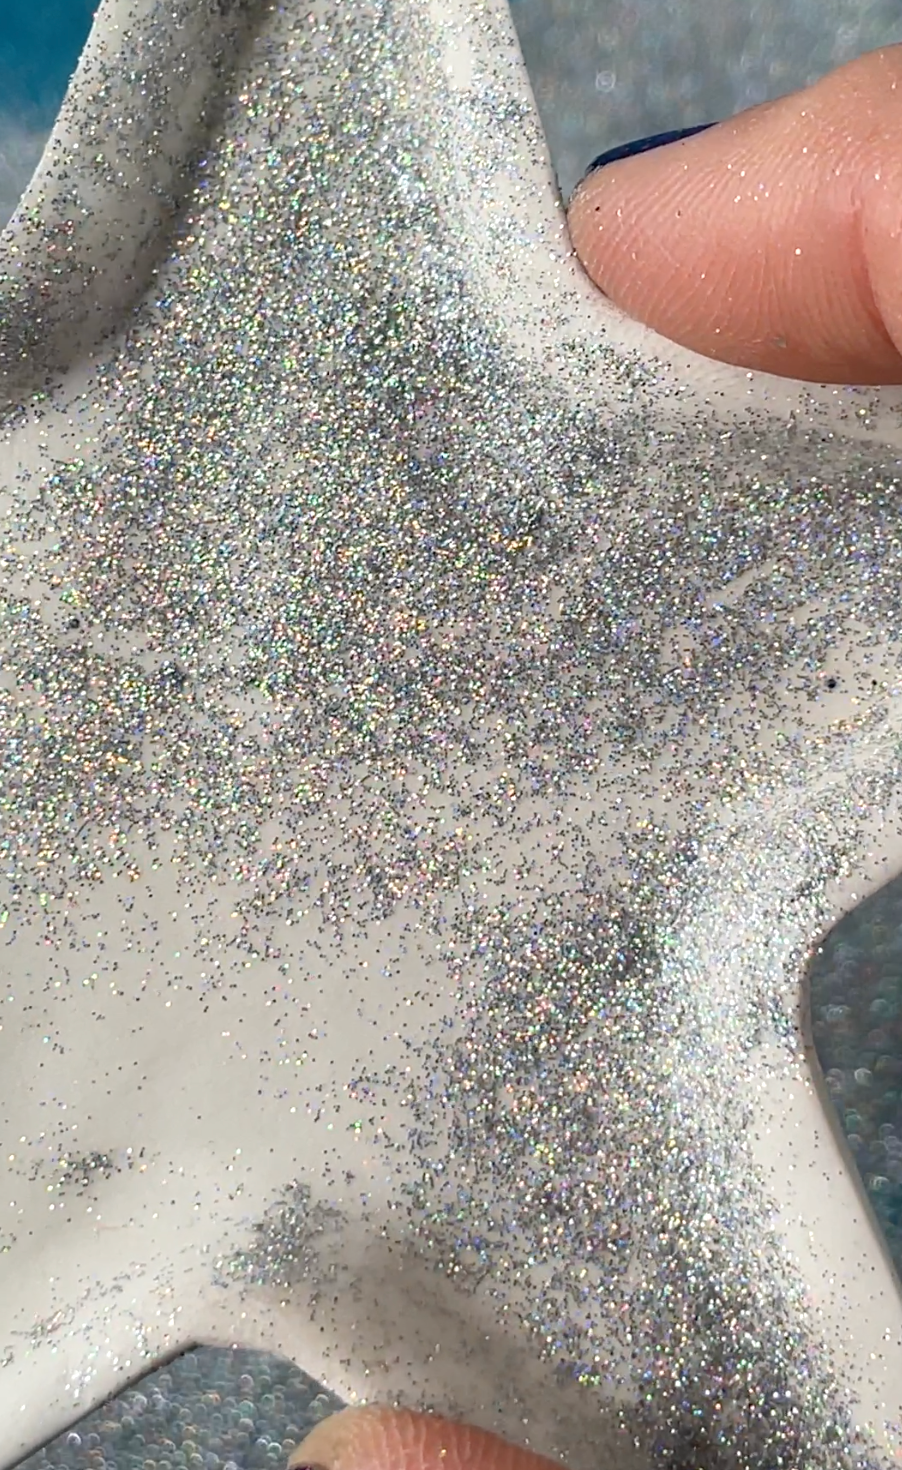 Super Silver Powder Fine holo Glitter for pens candles earrings clay resin mugs slime tumblers nail art 2 oz